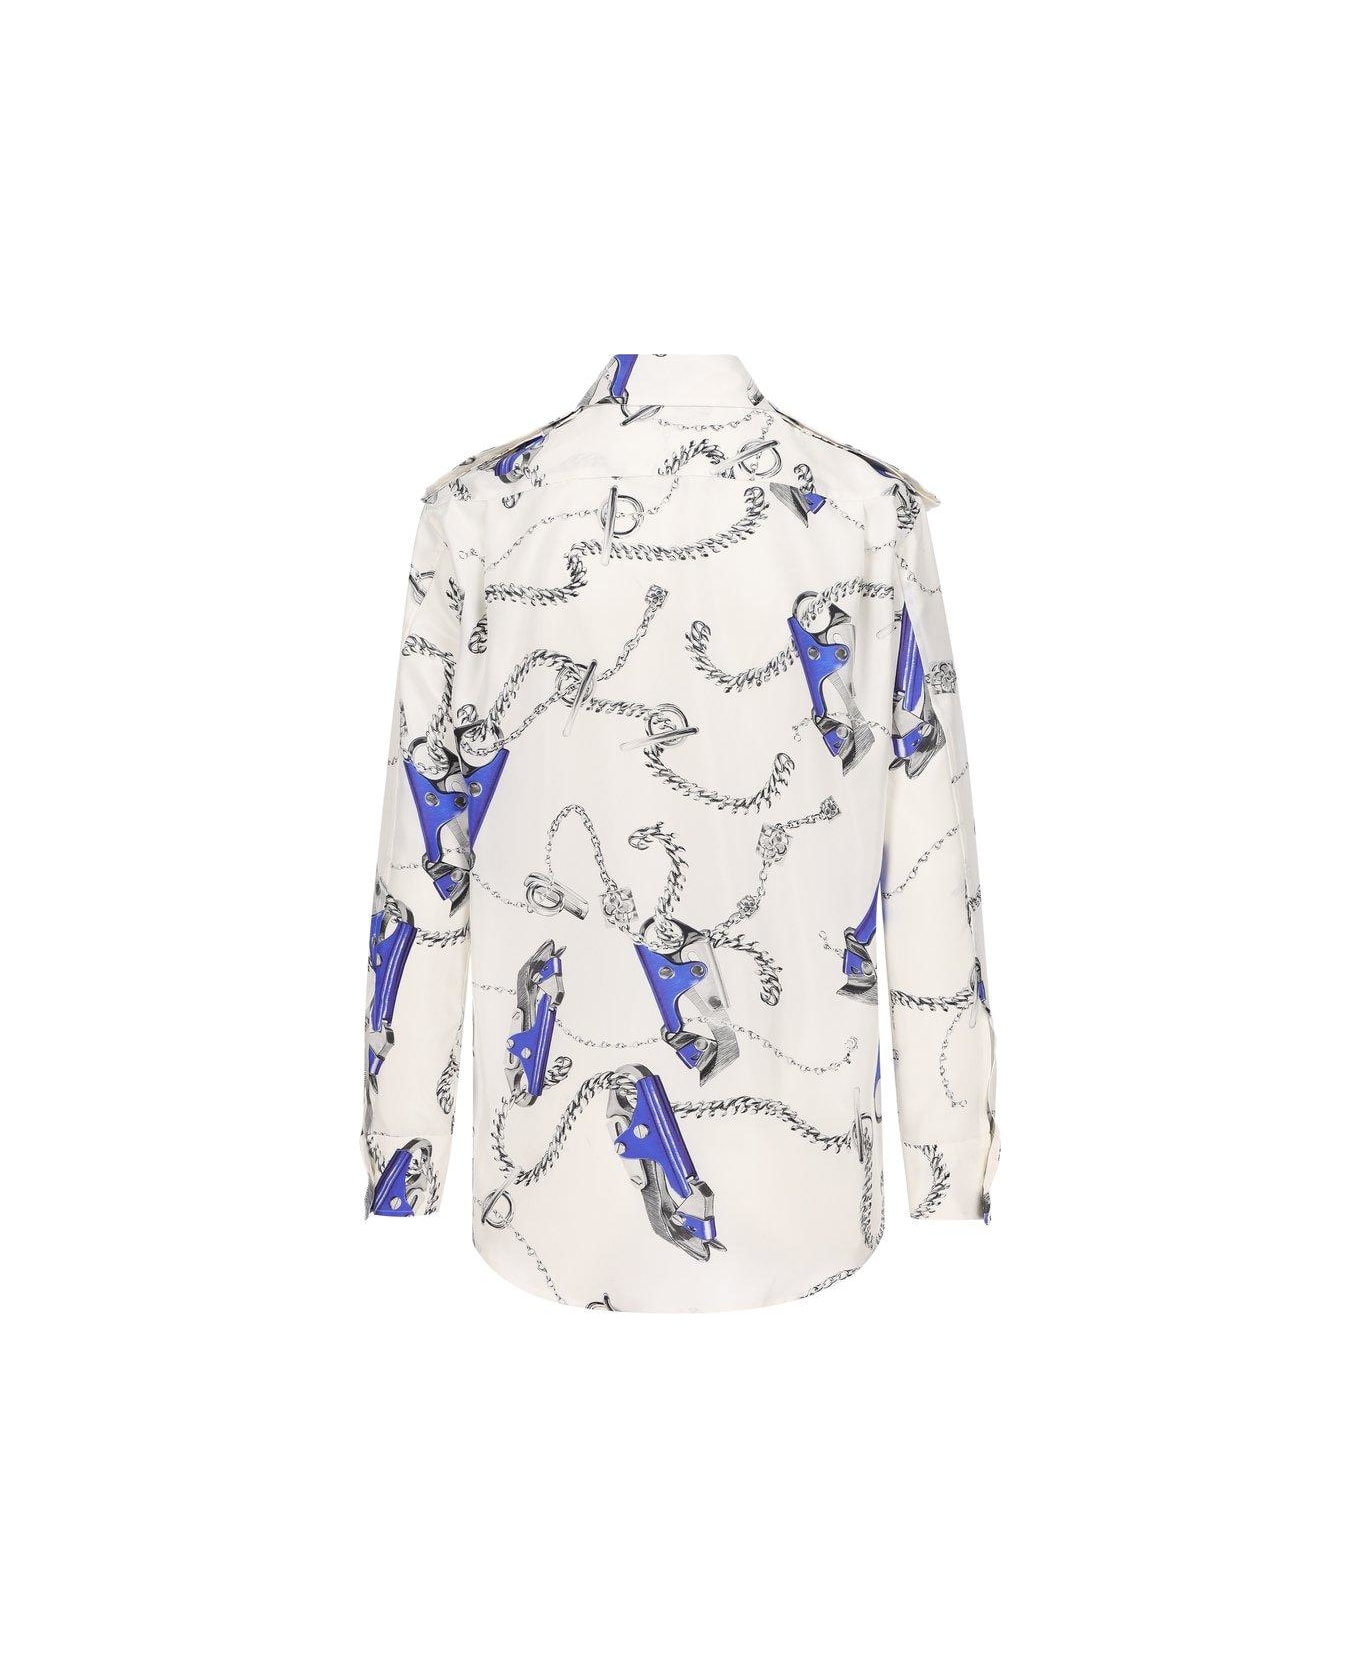 Burberry Graphic Printed Buttoned Shirt - WHITE/BLUE シャツ